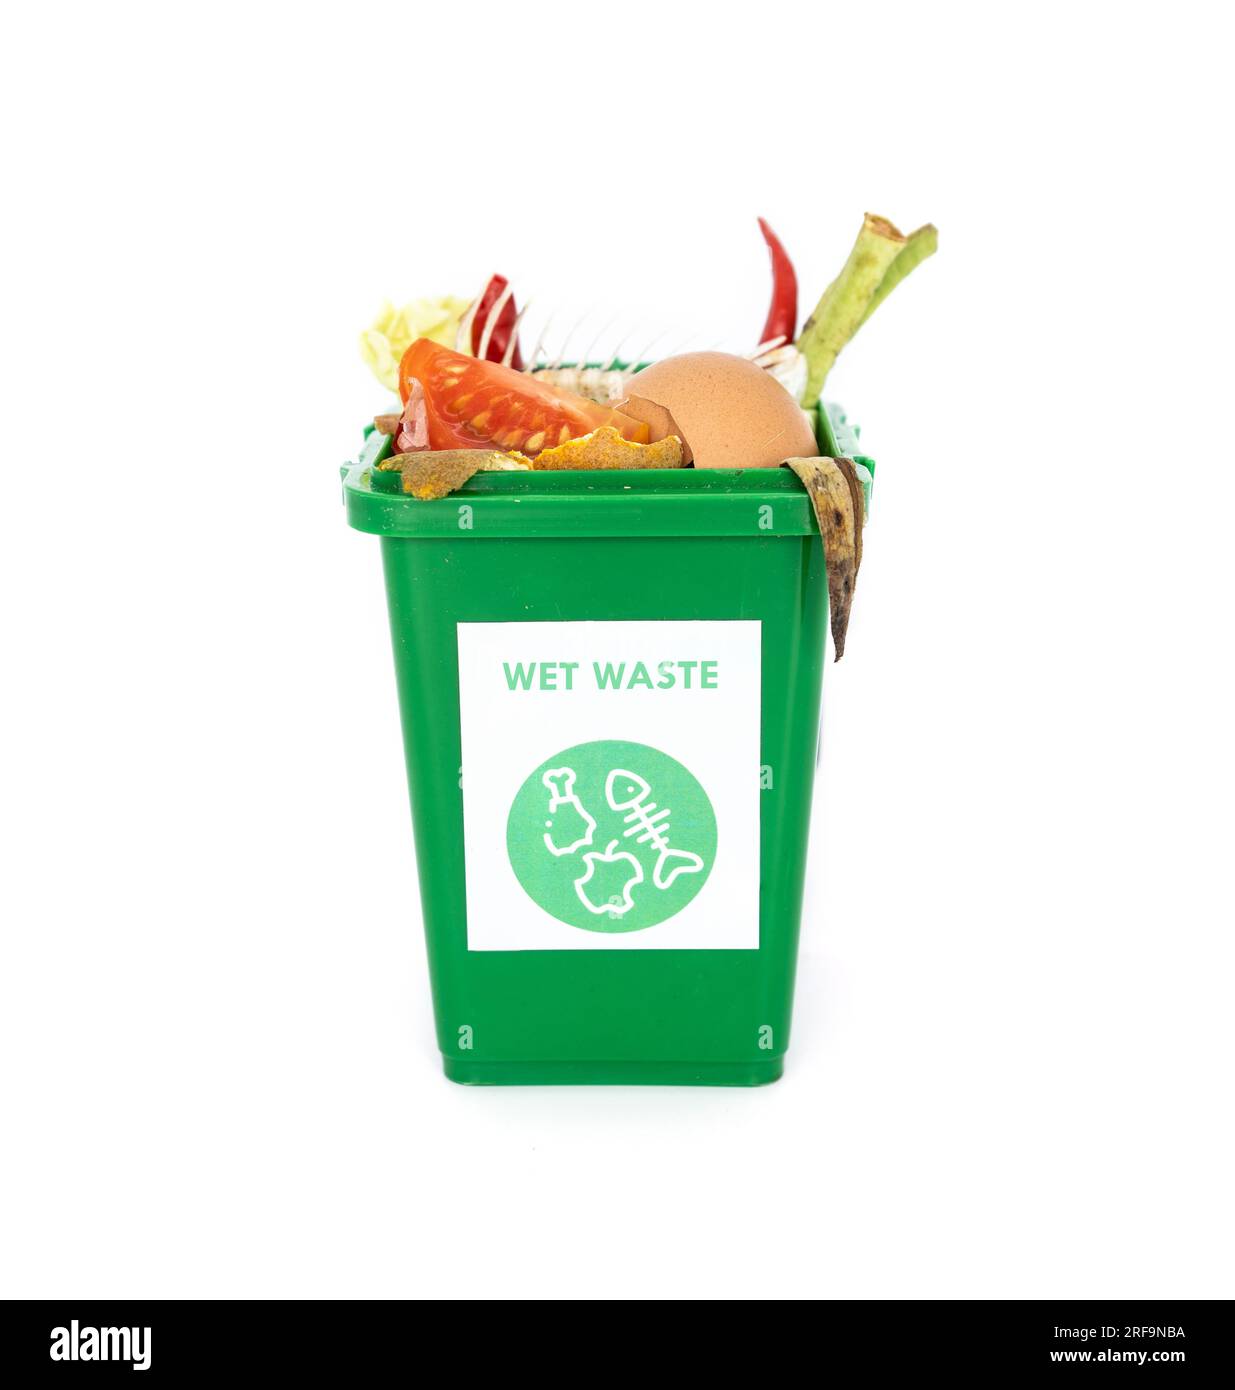 The concept of waste classification for recycling. Green bin for wet or organic waste.The bins are filled with food scraps or scraps of fruits and veg Stock Photo